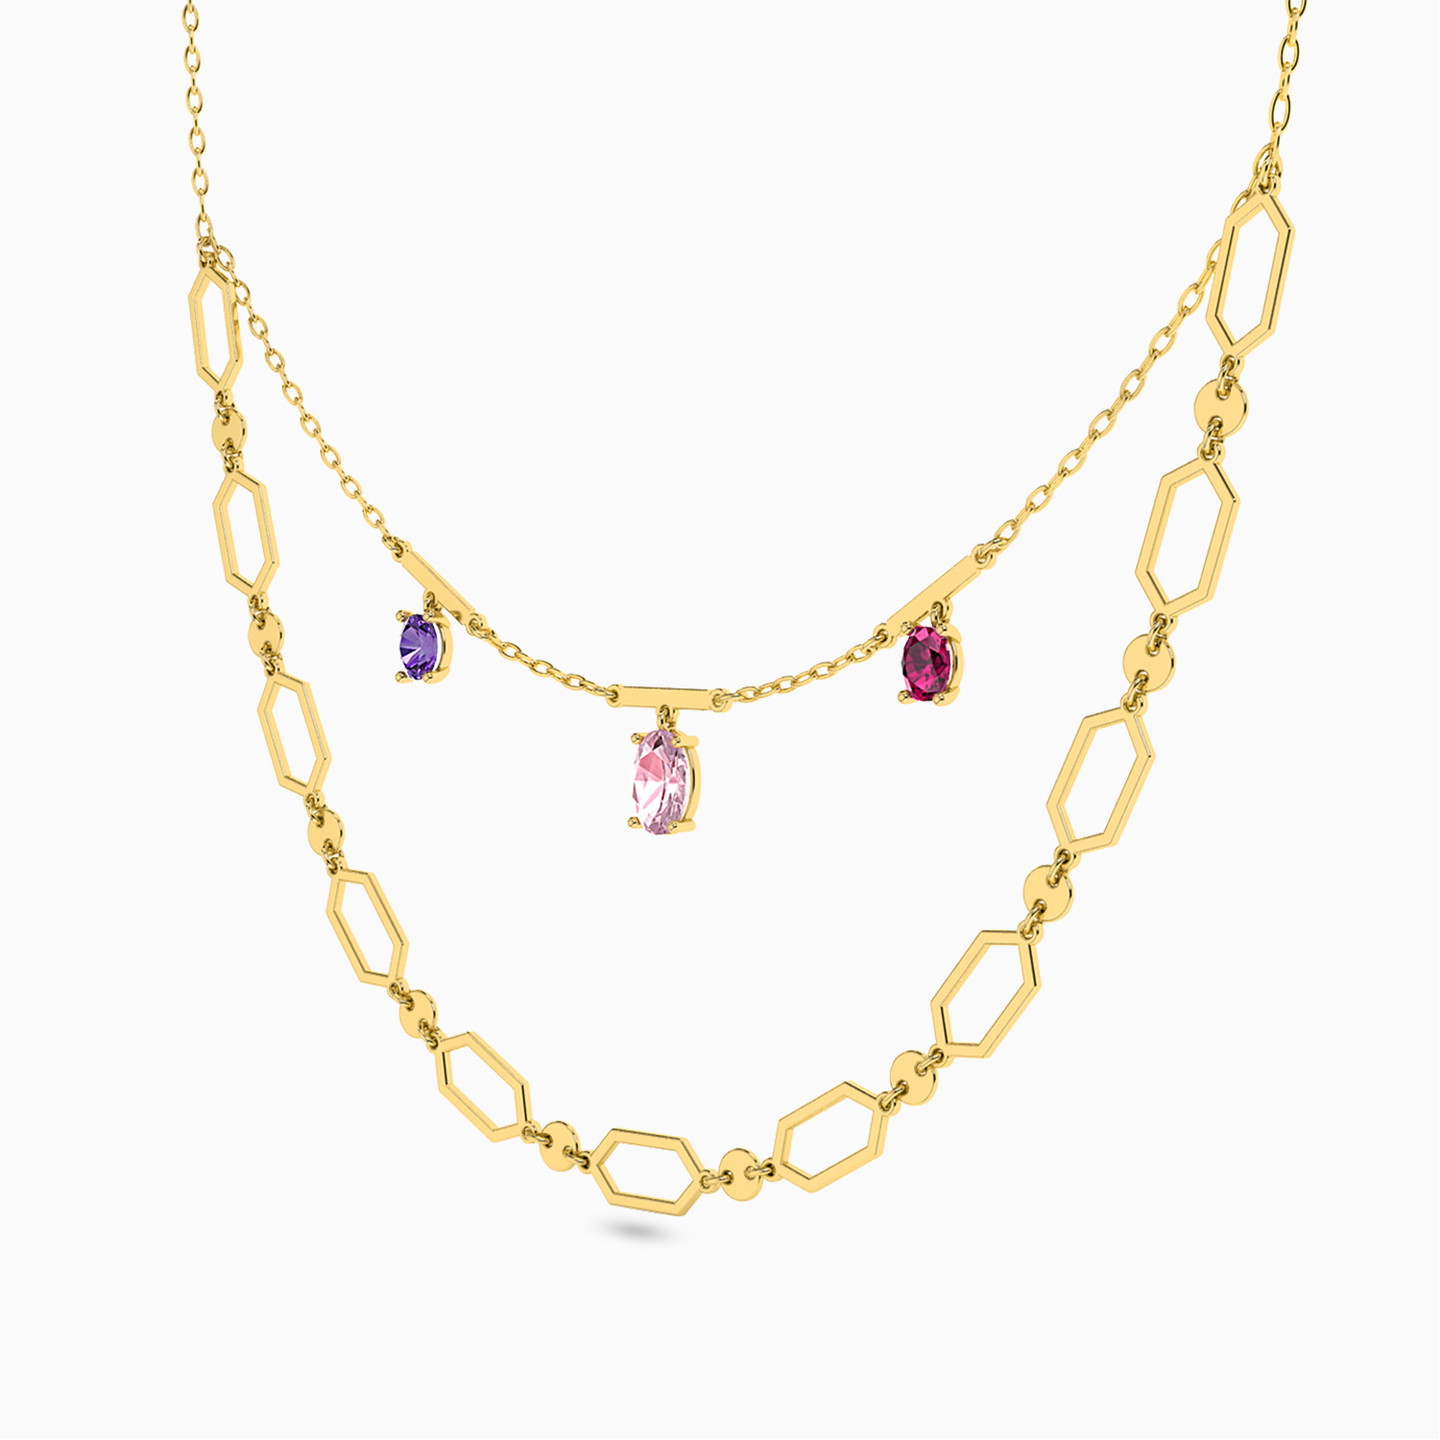 18K Gold Colored Stones Layered Necklace - 2